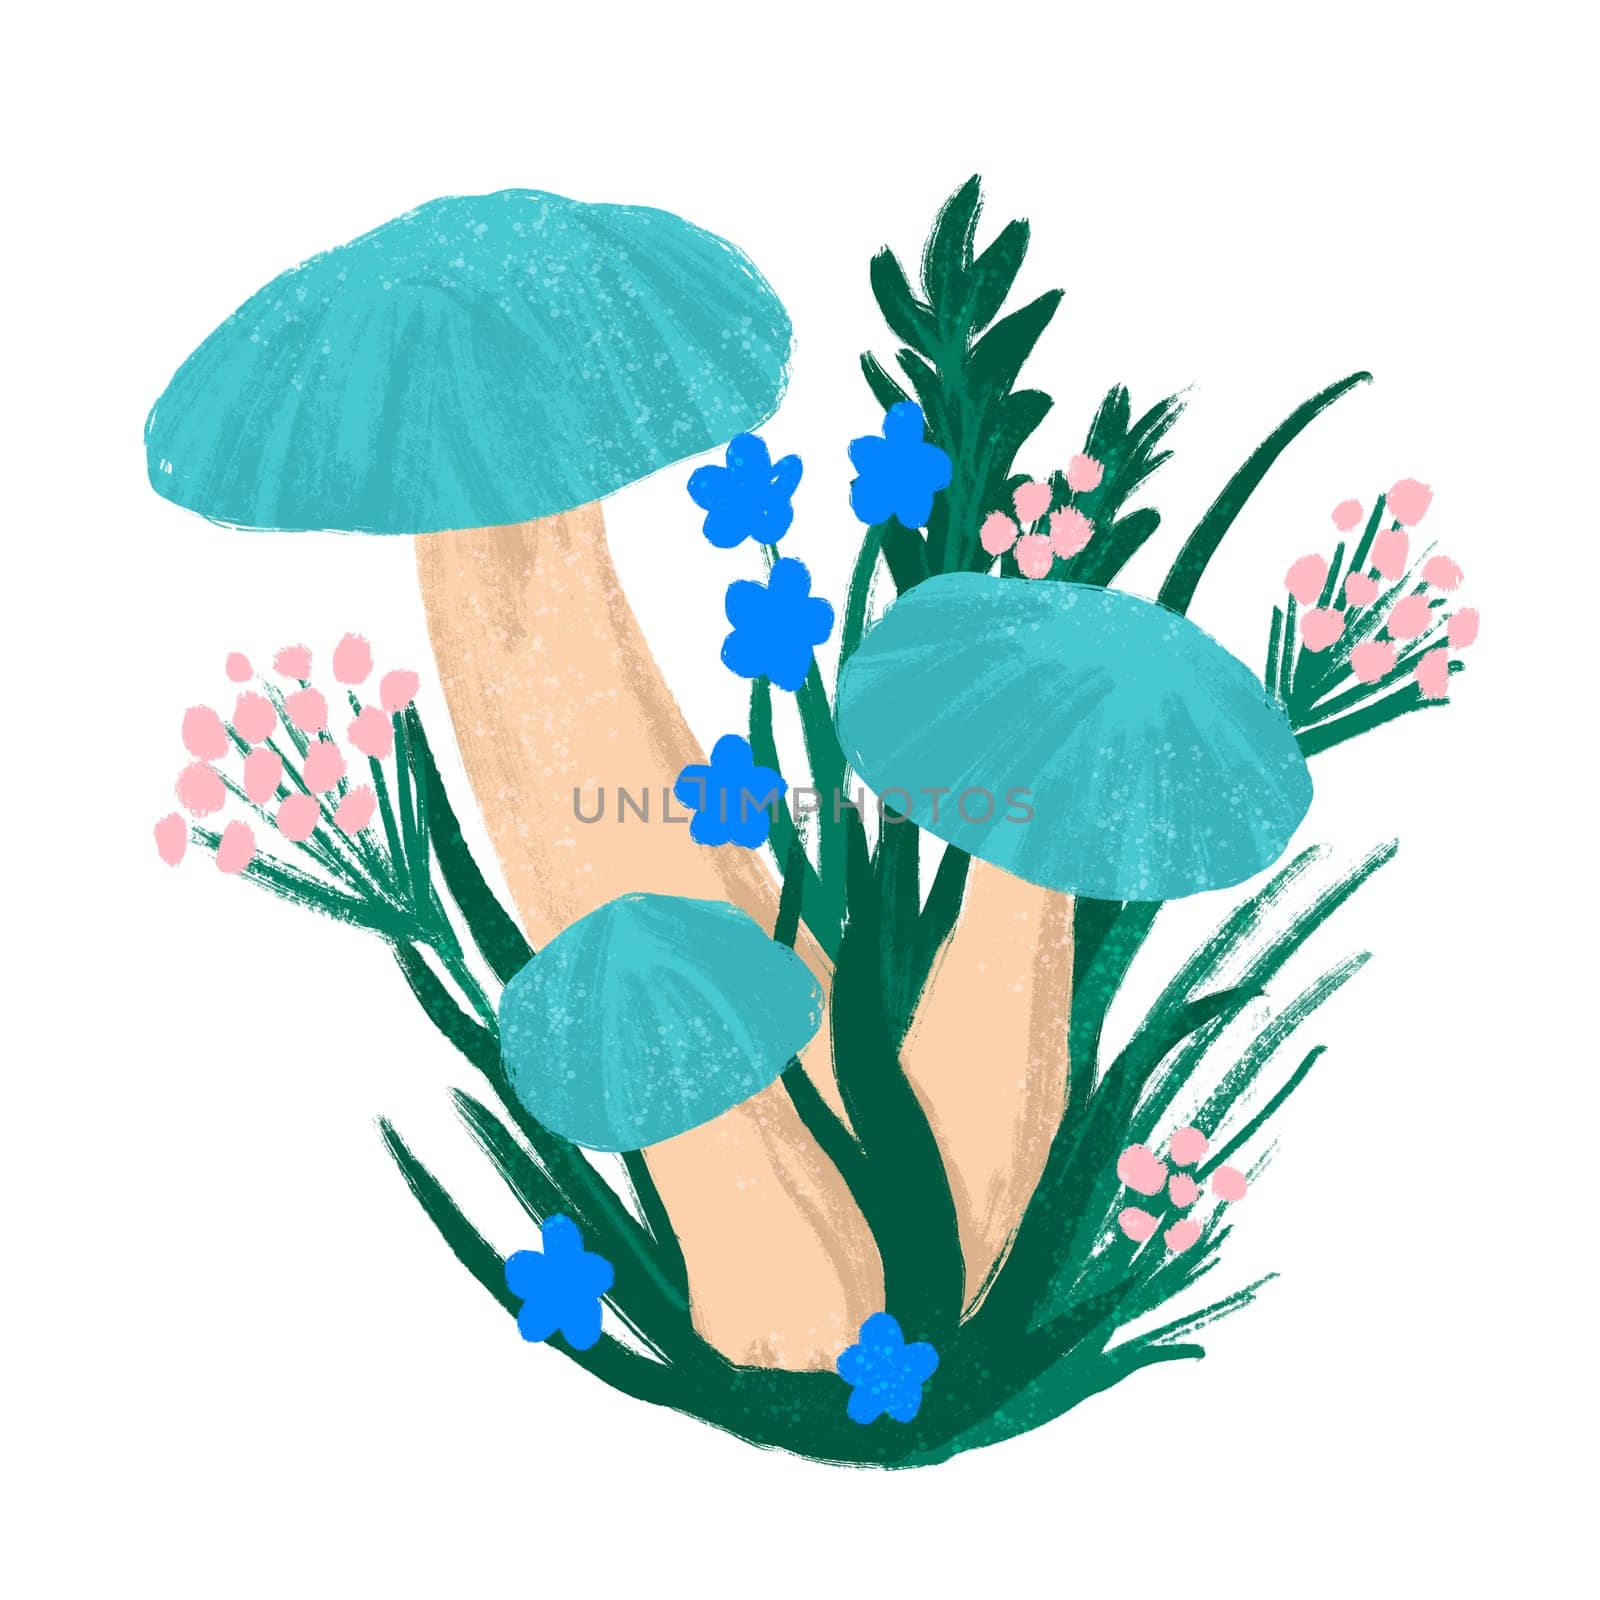 Hand drawn illustration of summer mushroom with grass herbs blue turquoise flowers. Fall autumn nature wood woodland forest, cute drawing fungus fungi wild poisonous edible shrooms. by Lagmar